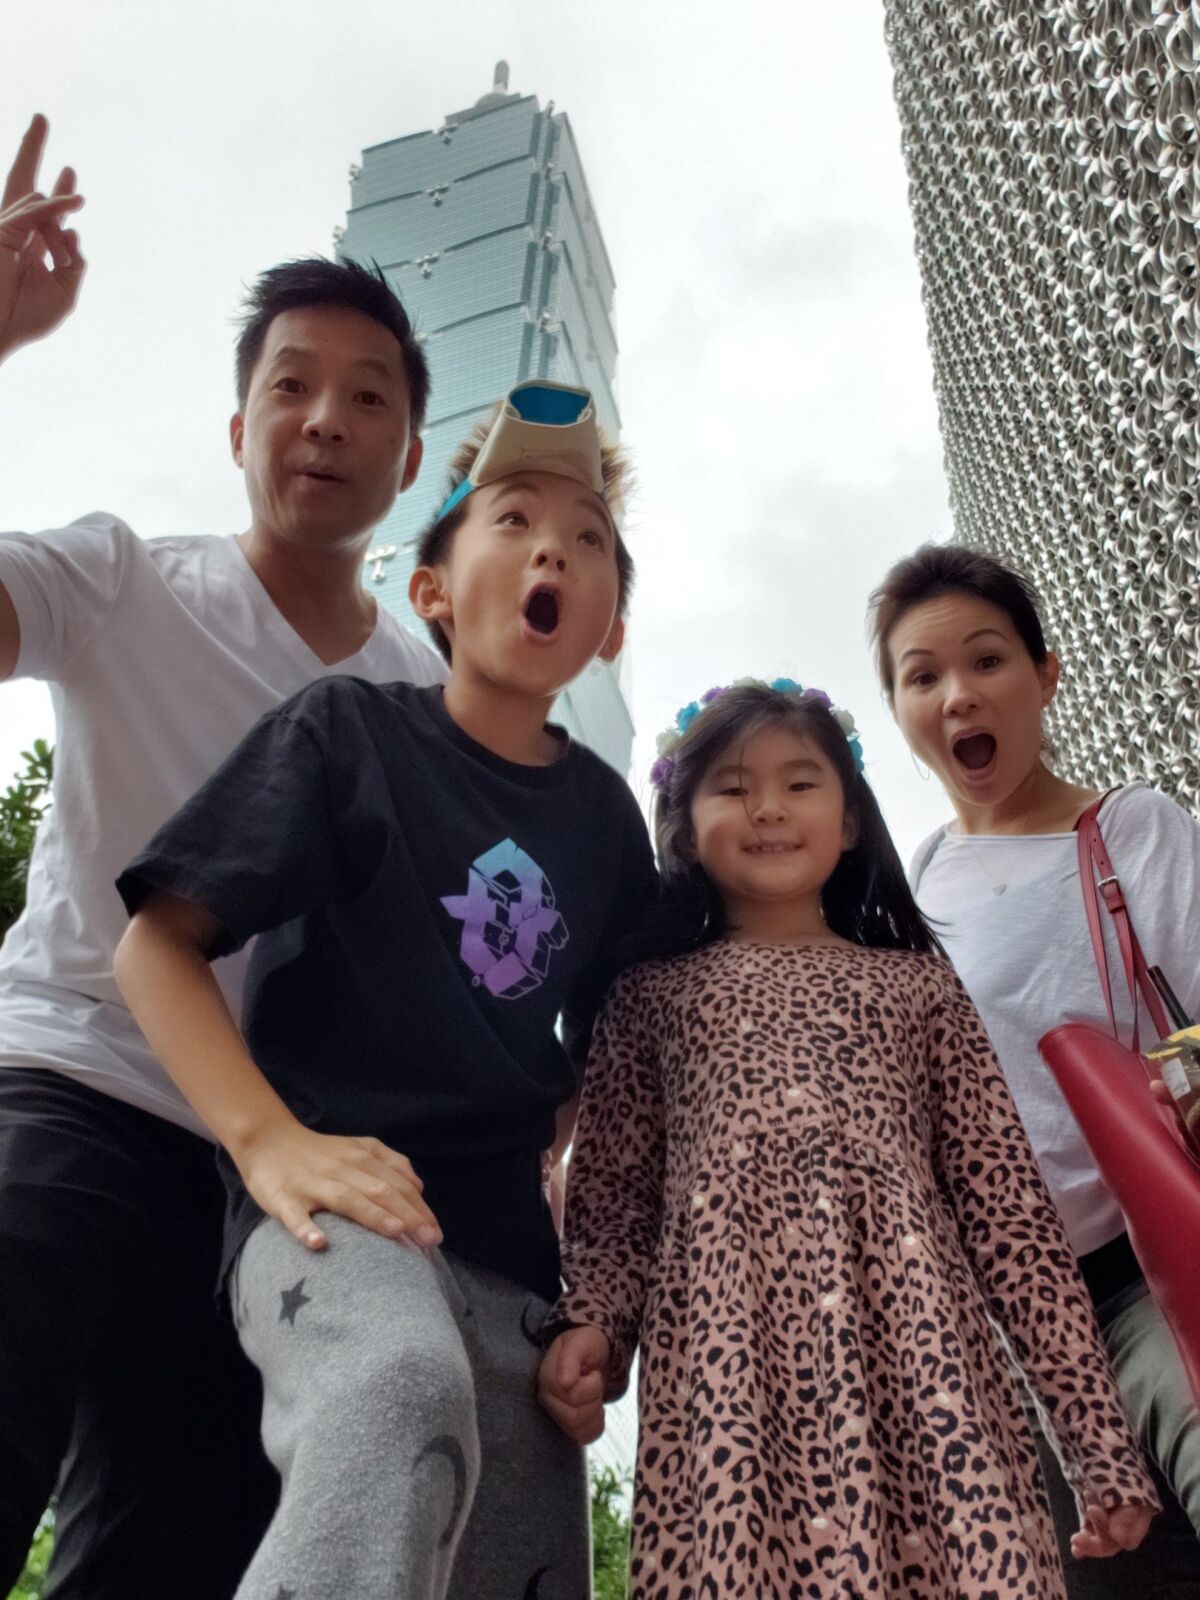 A man, woman and two children pose in front of a skyscraper.